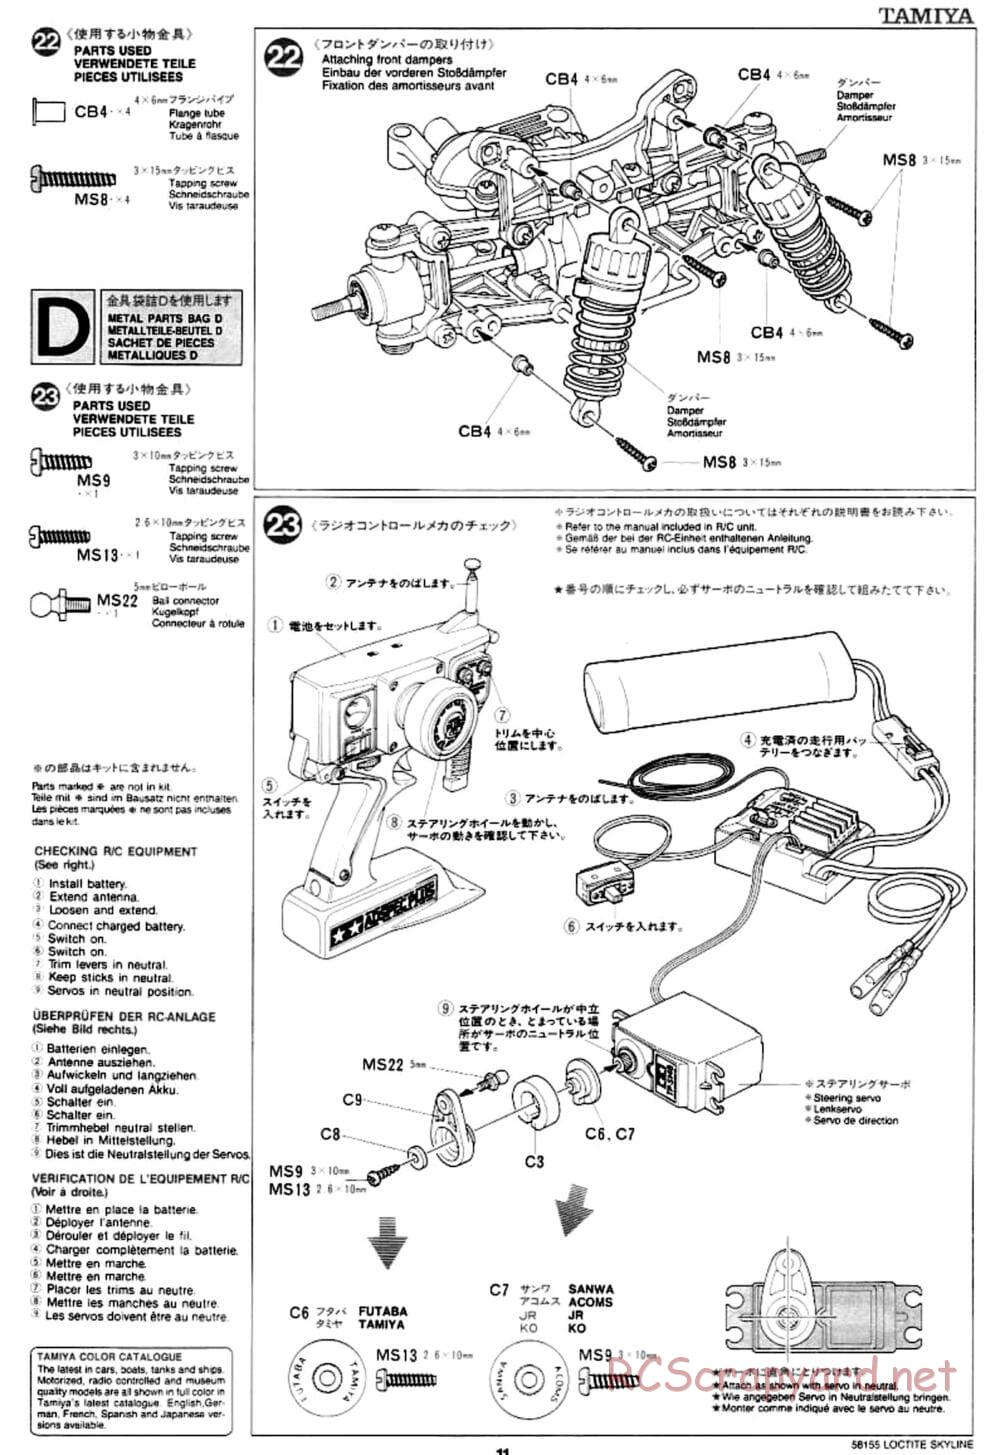 Tamiya - Loctite Nissan Skyline GT-R N1 - TA-02 Chassis - Manual - Page 11